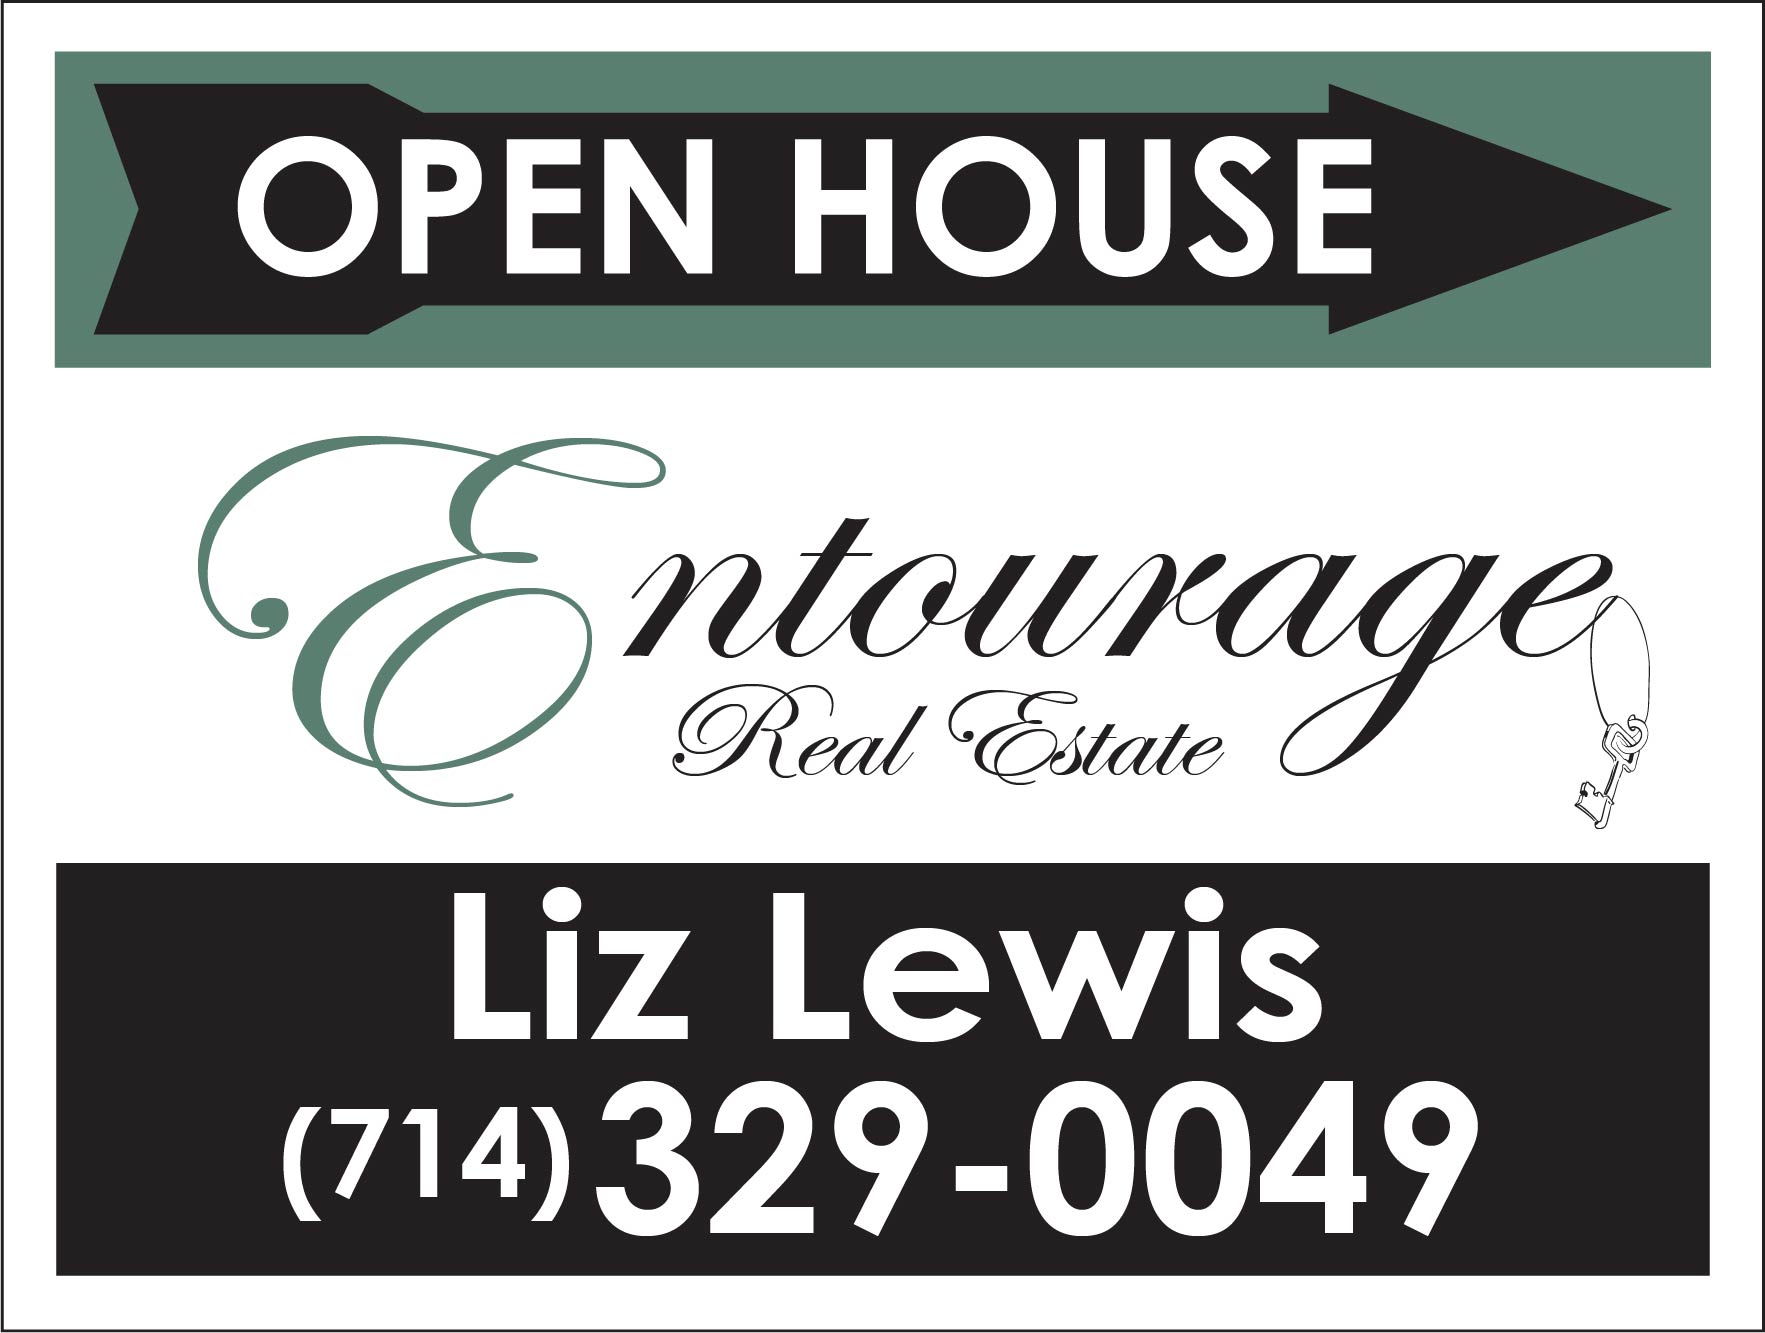 Open House Signs Printing Services in Los Angeles